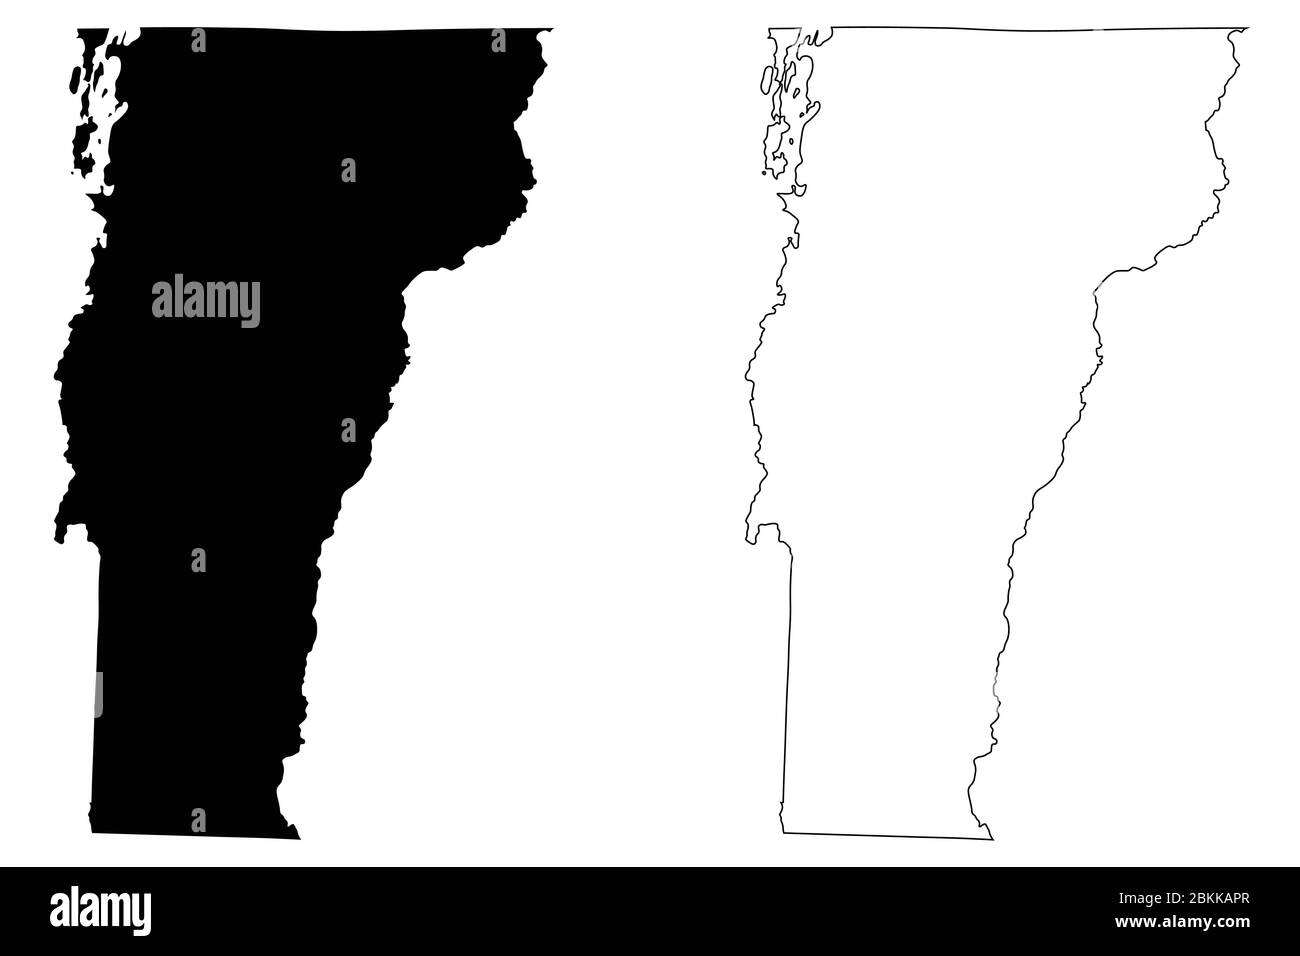 Vermont VT state Maps. Black silhouette and outline isolated on a white background. EPS Vector Stock Vector